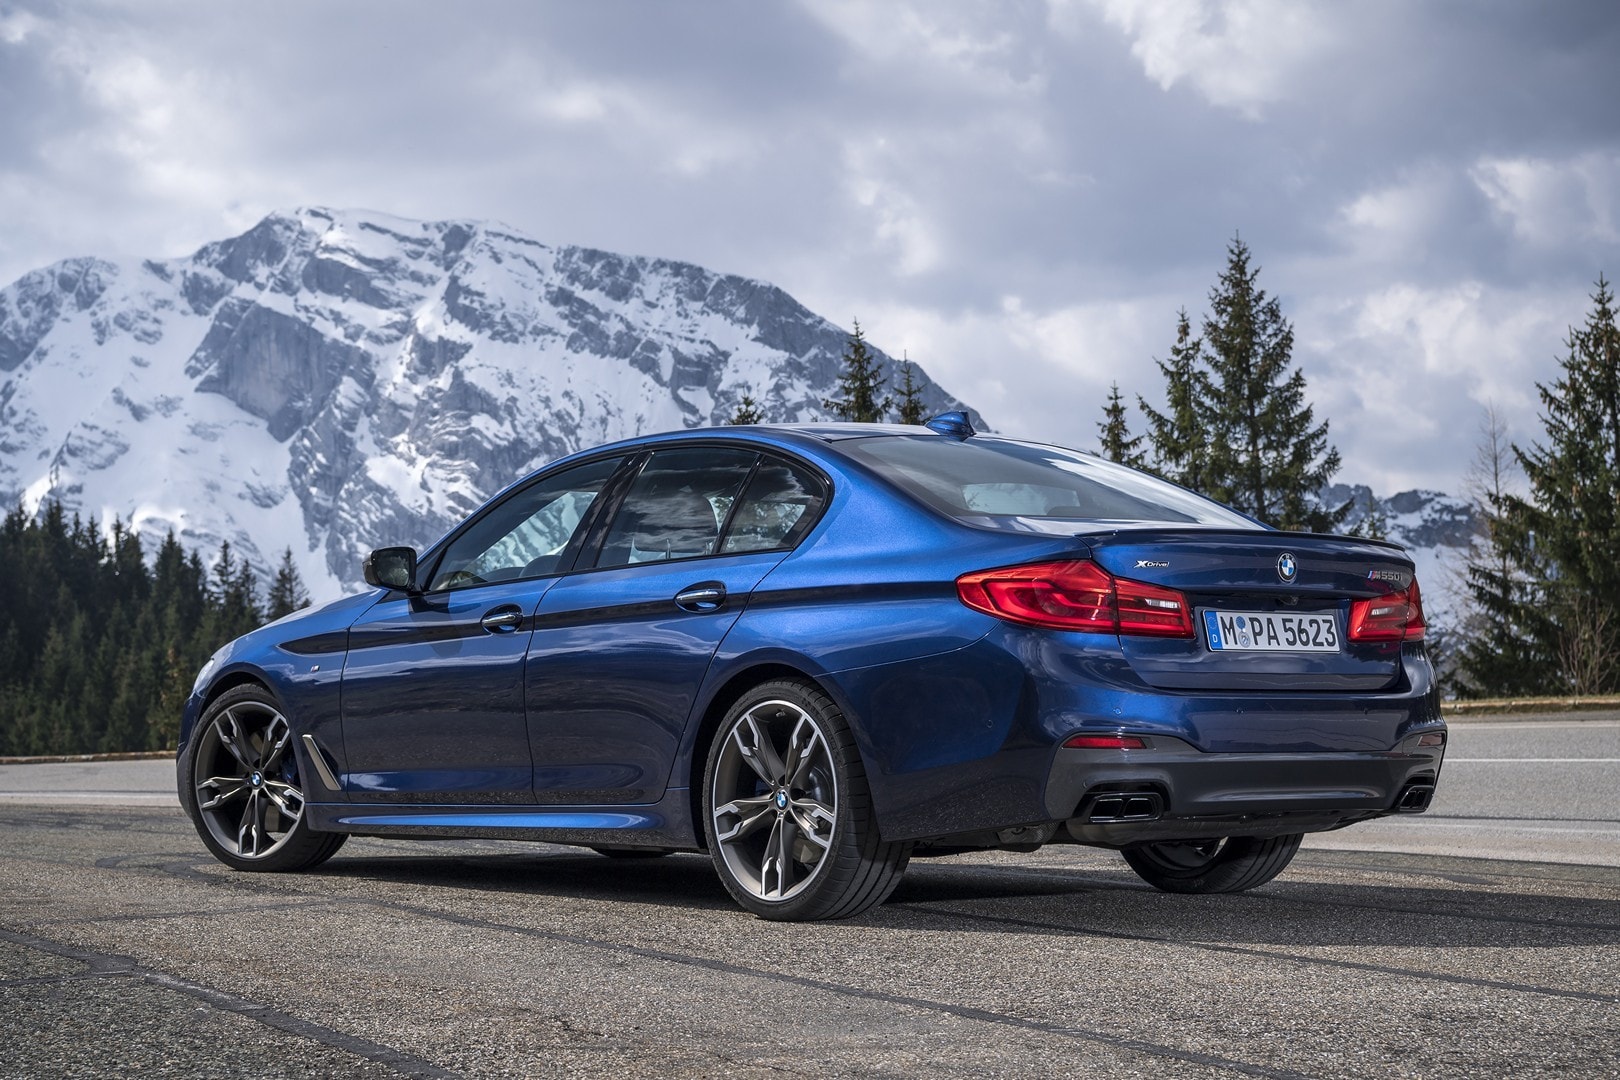 https://s1.cdn.autoevolution.com/images/news/bmw-squeezes-out-more-power-from-x3-m40i-x4-m40i-m550i-xdrive-in-the-us-139621_1.jpg